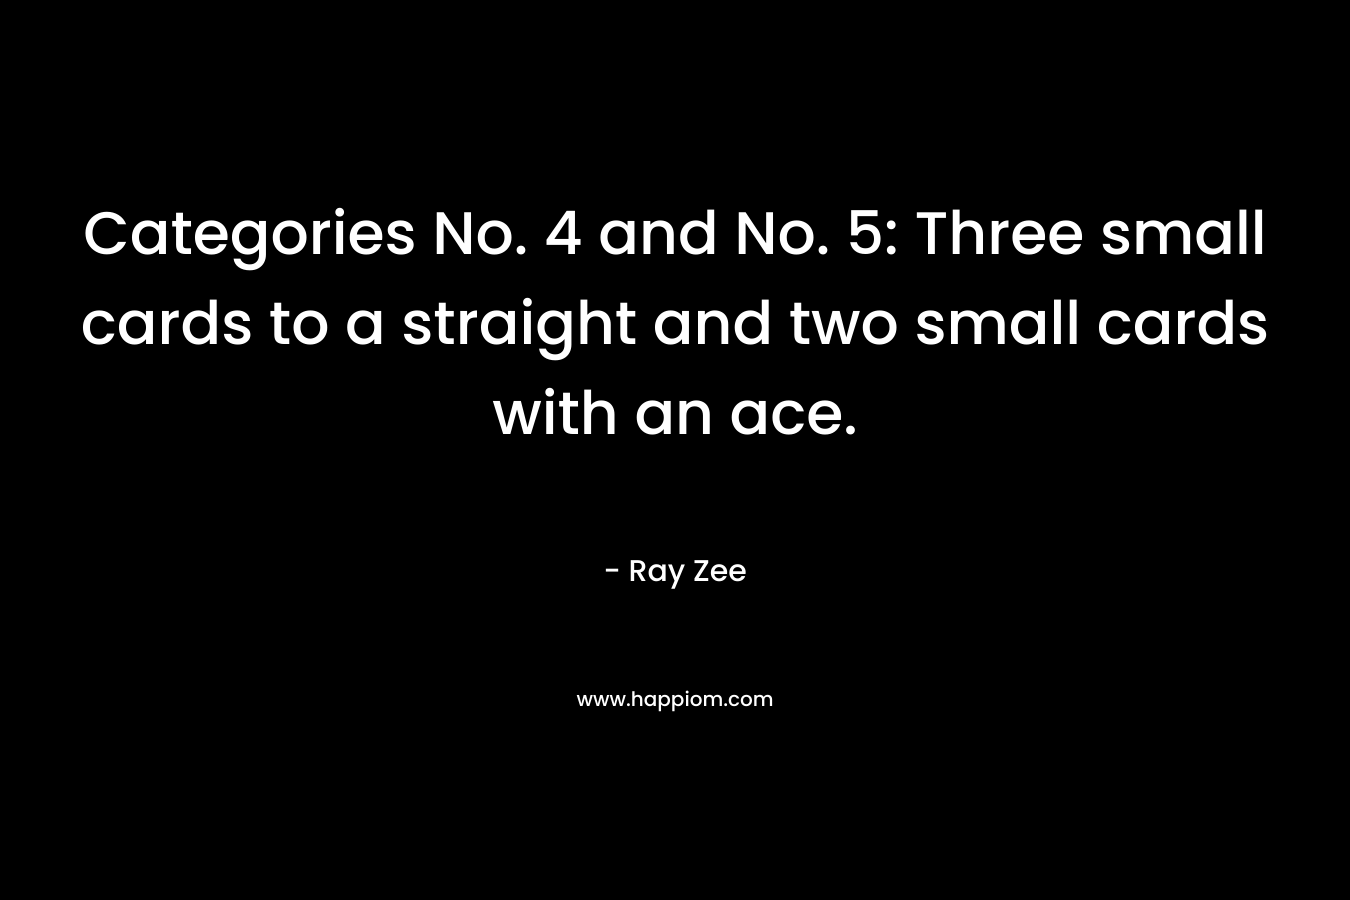 Categories No. 4 and No. 5: Three small cards to a straight and two small cards with an ace.